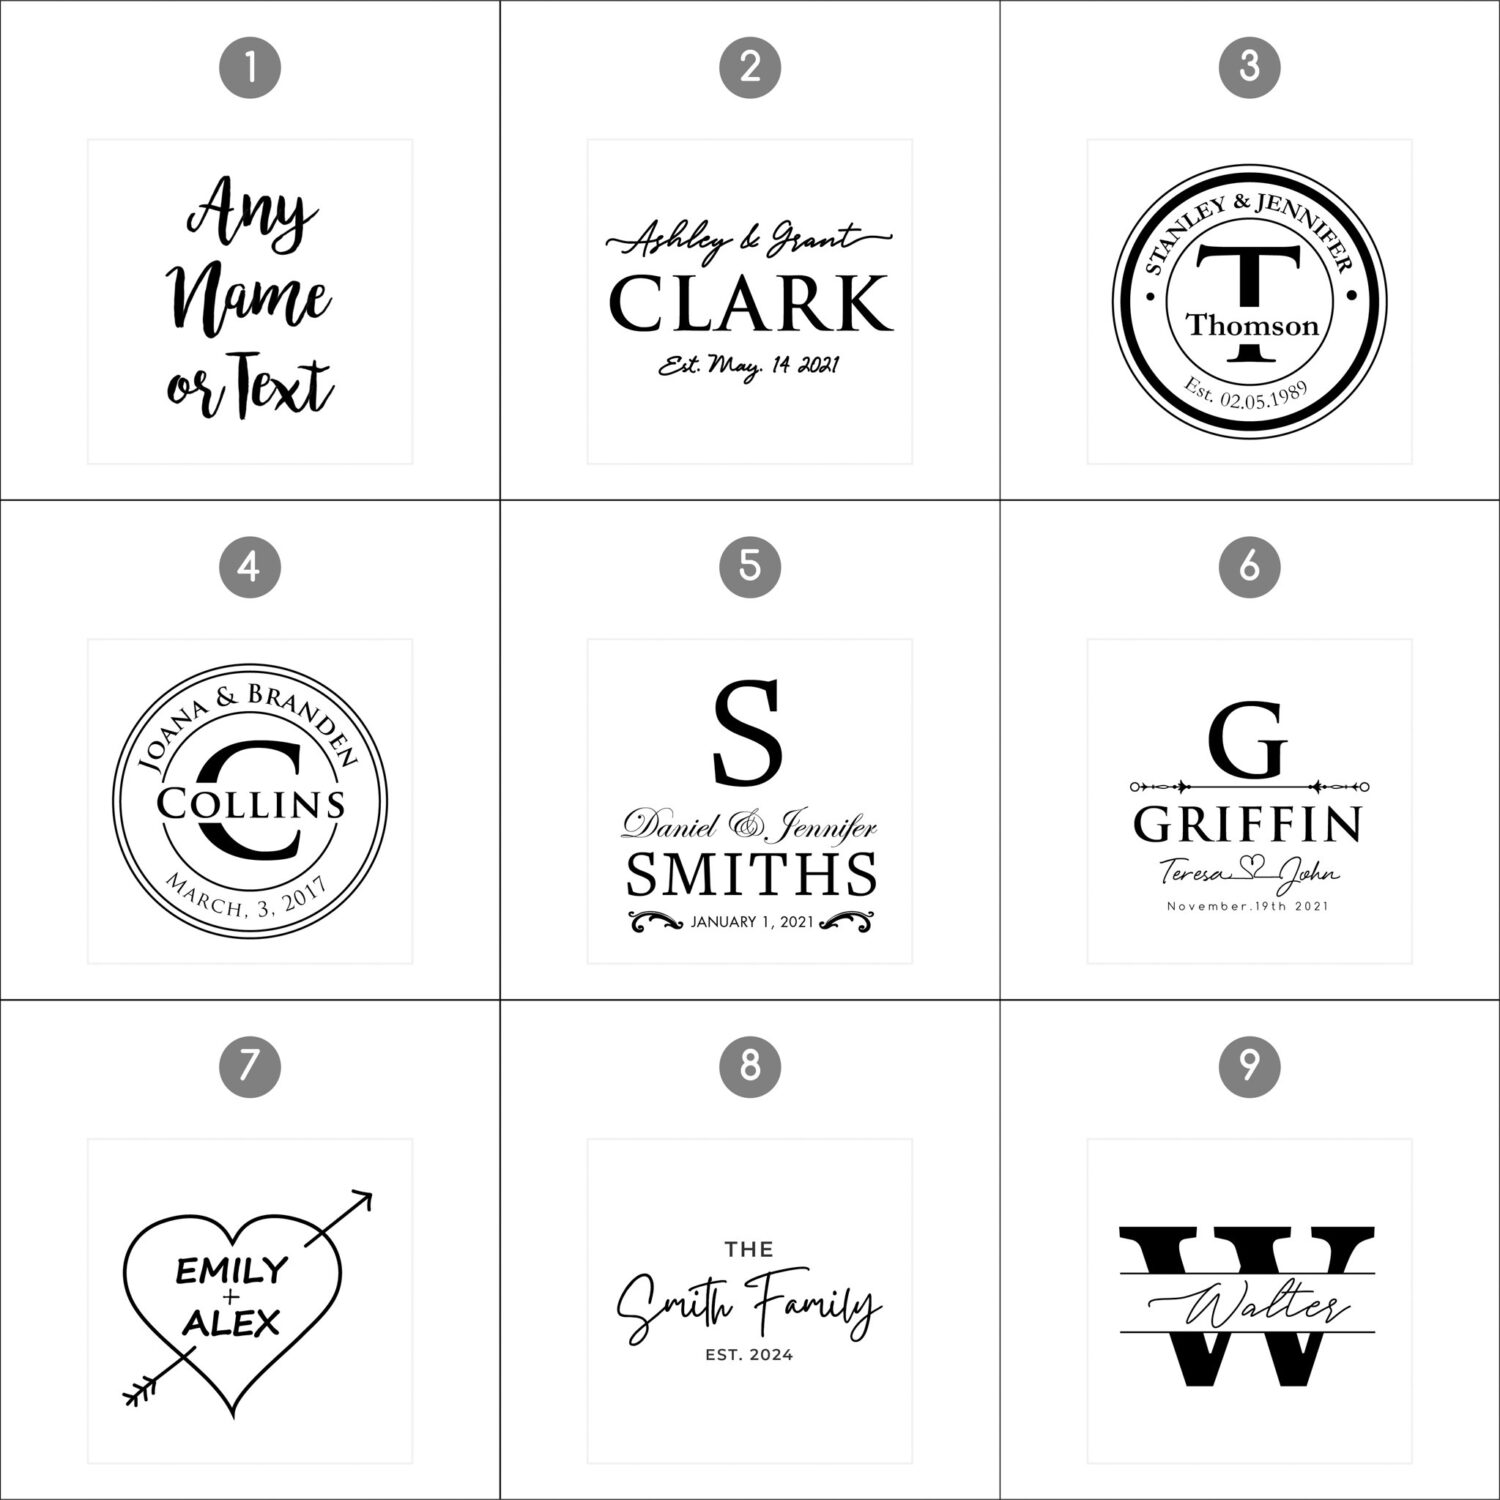 Nine different personalized wedding logo designs with various fonts and decorative elements.